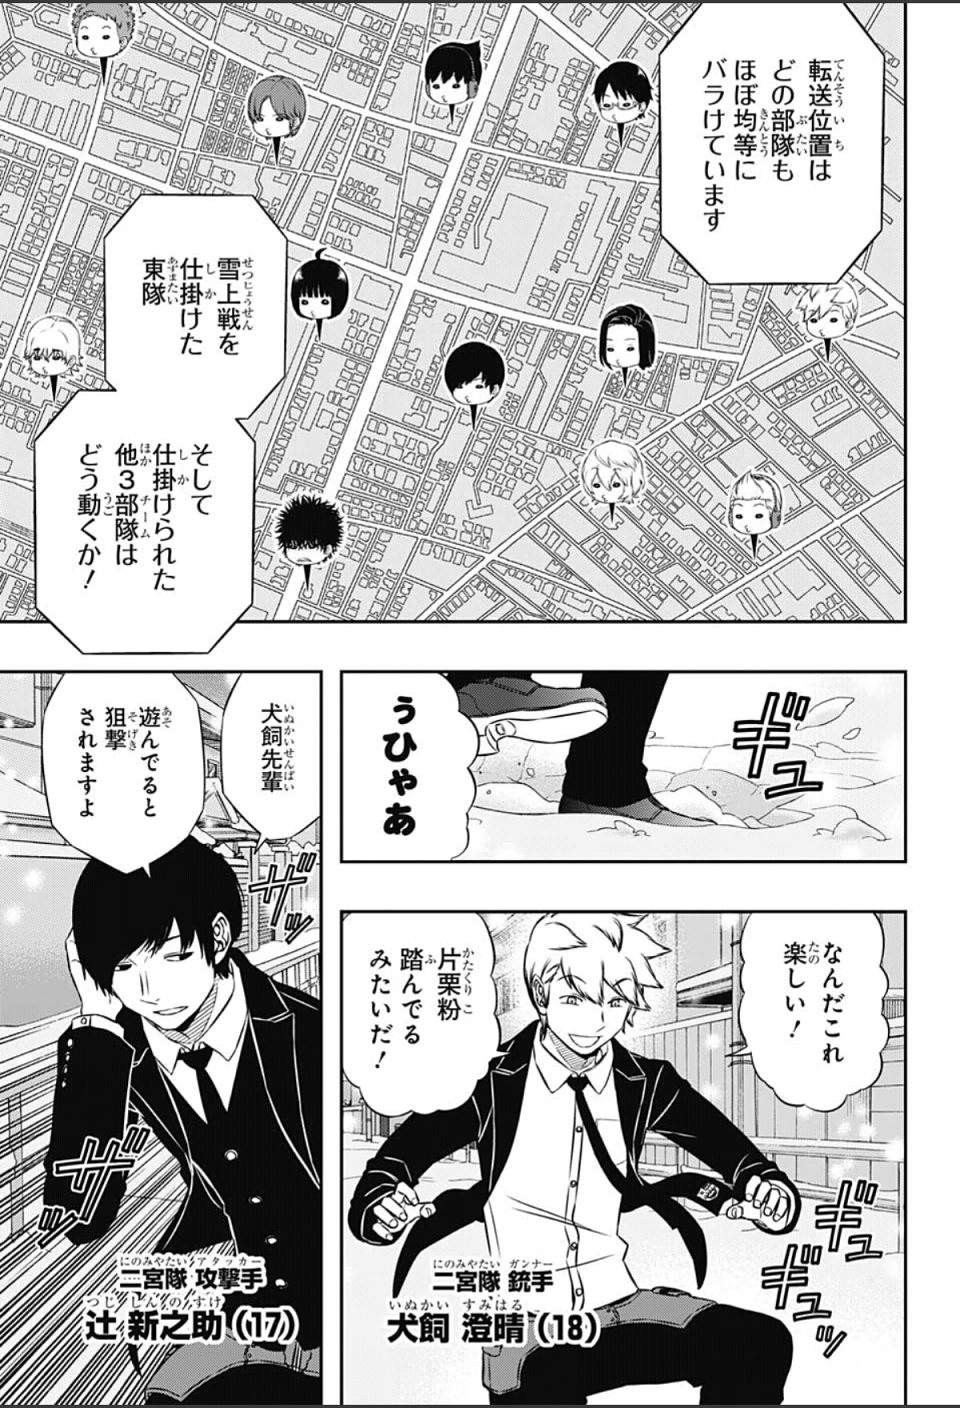 World Trigger - Chapter 111 - Page 3